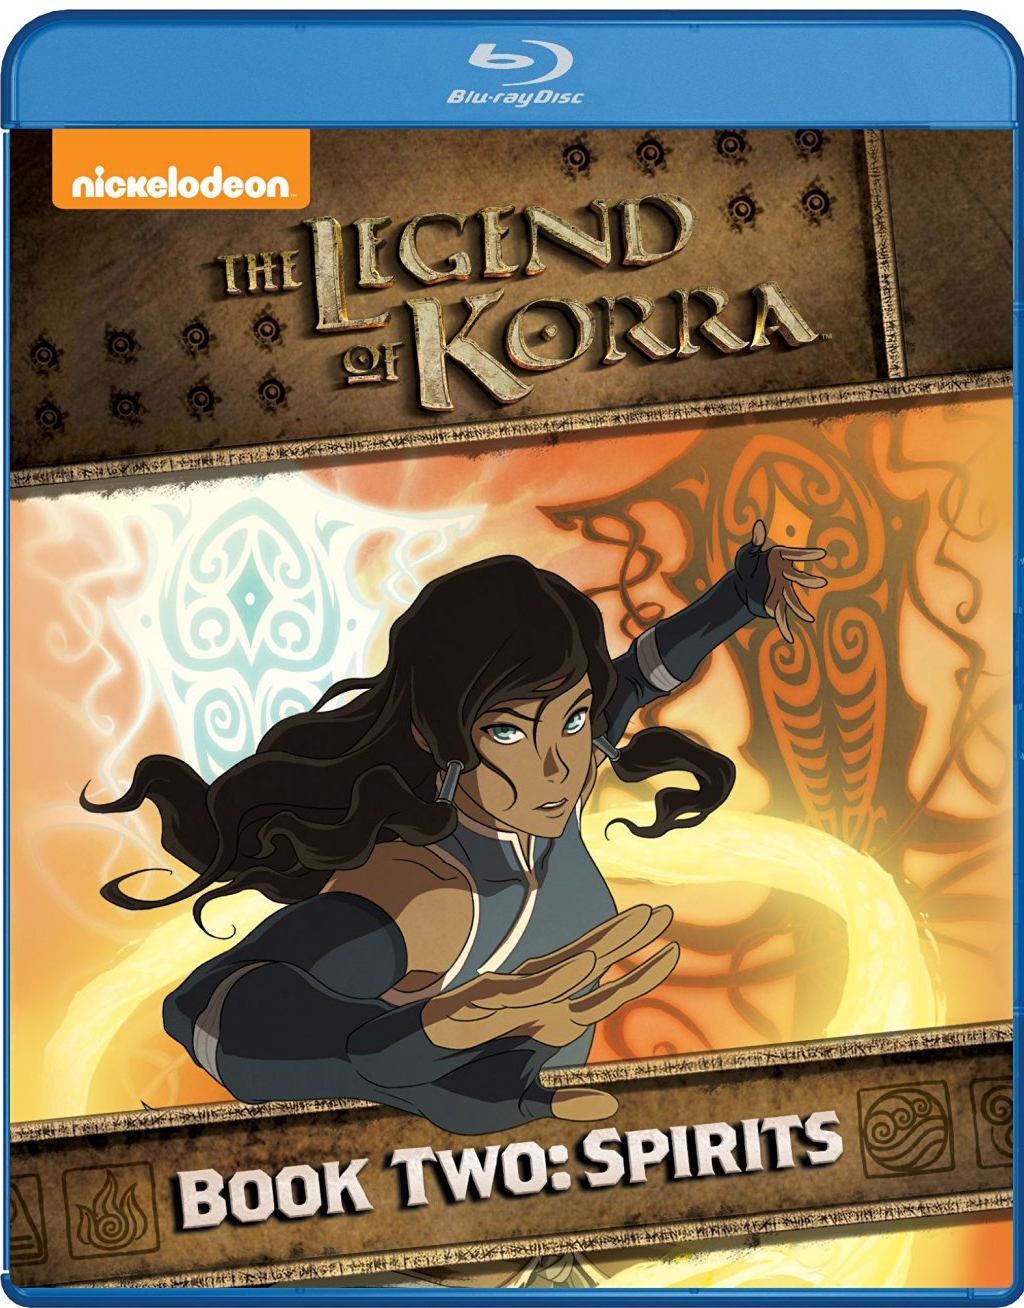 Legend of Korra, The: Book Two